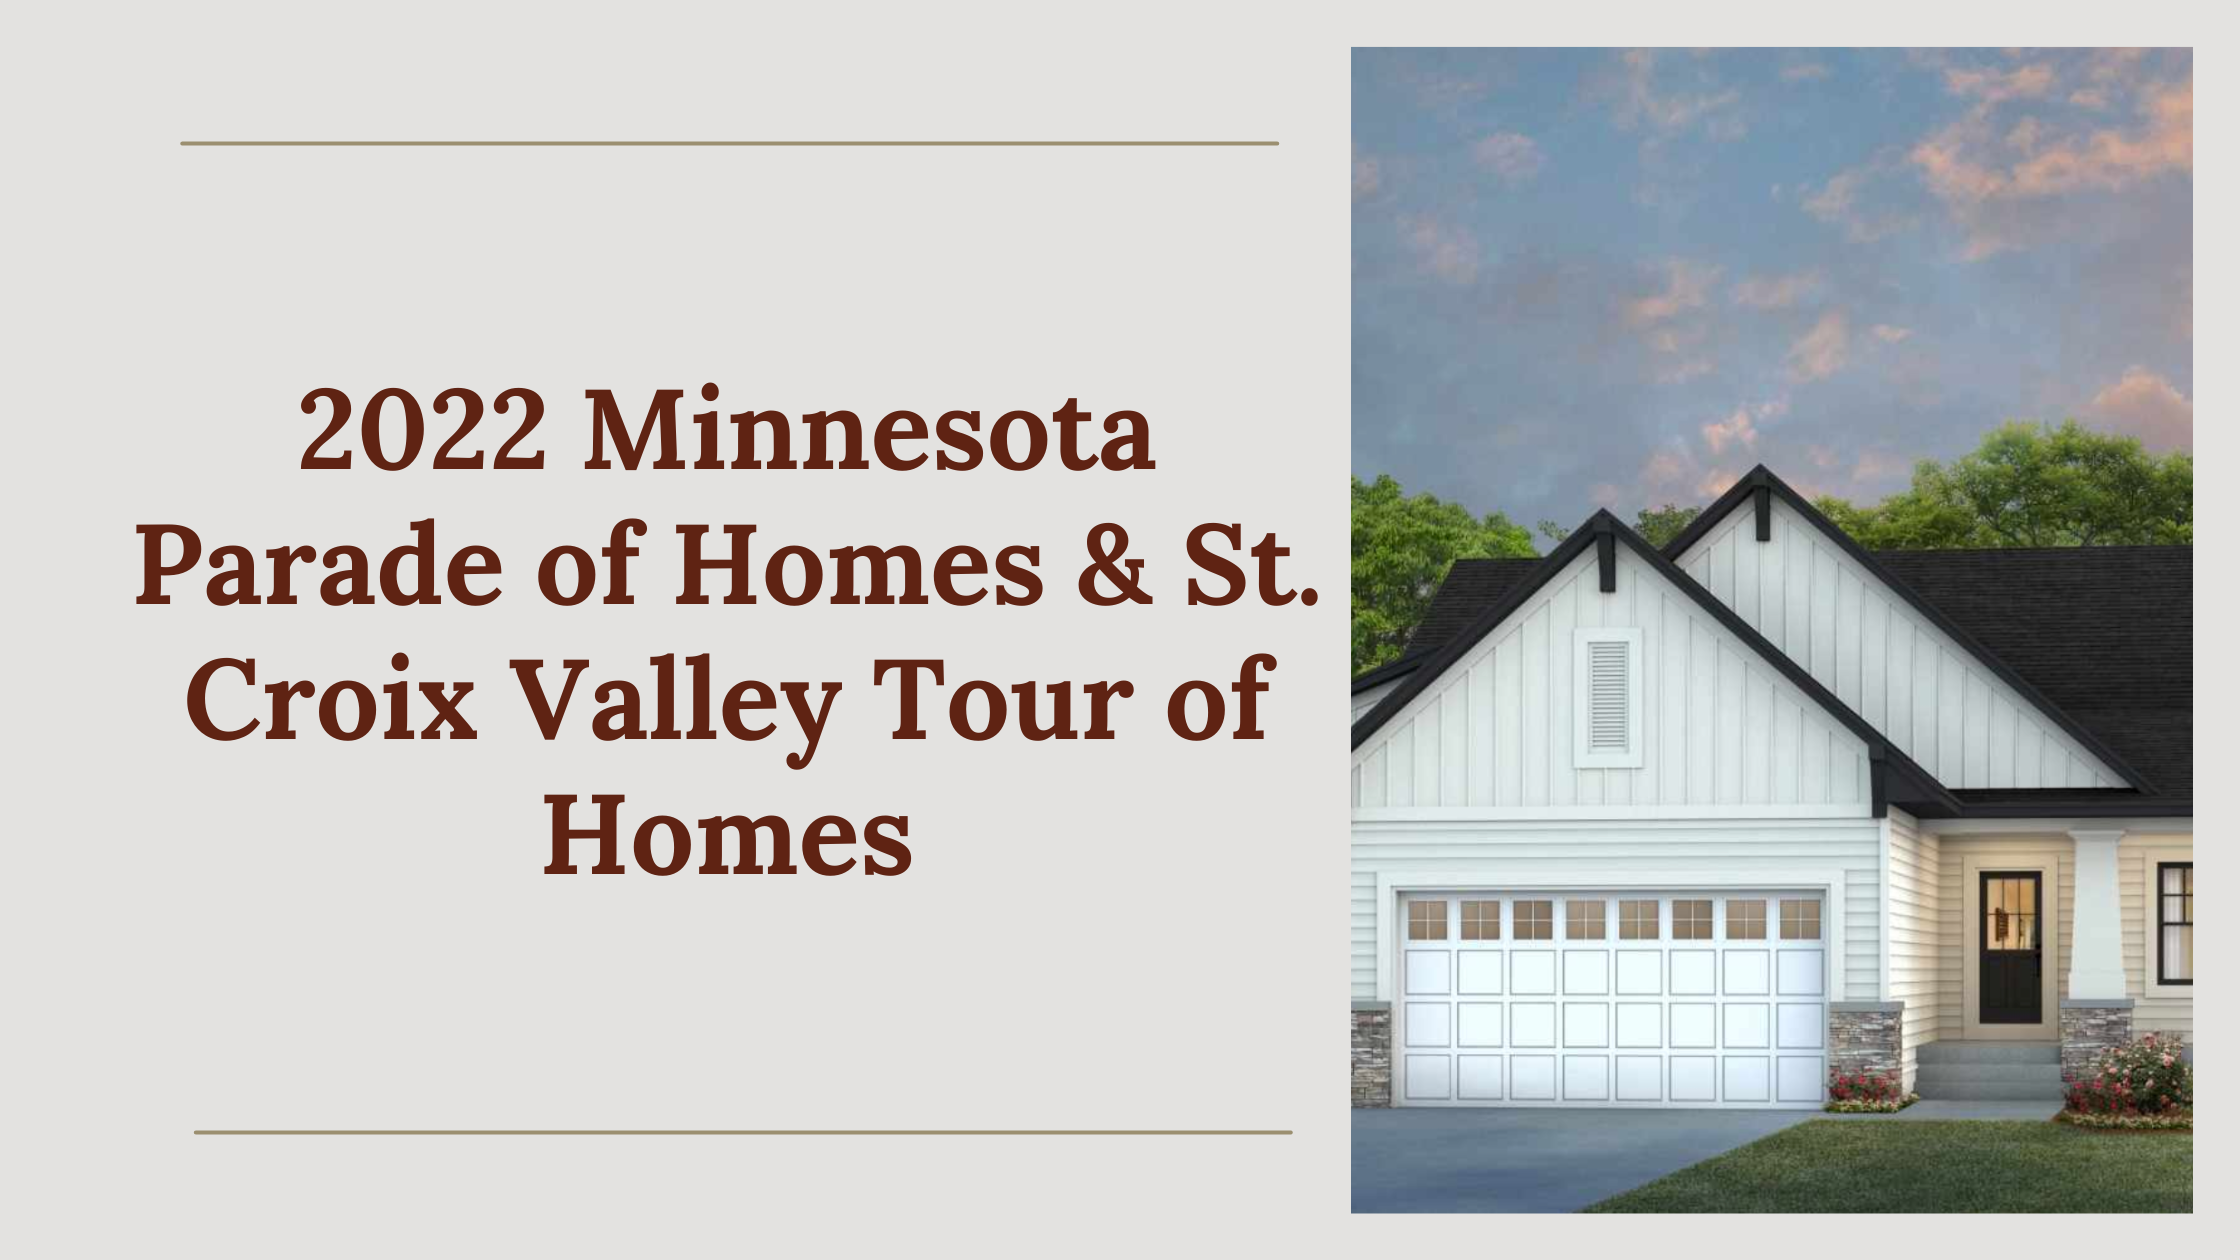 2022 Minnesota Parade of Homes & St. Croix Valley Tour of Homes